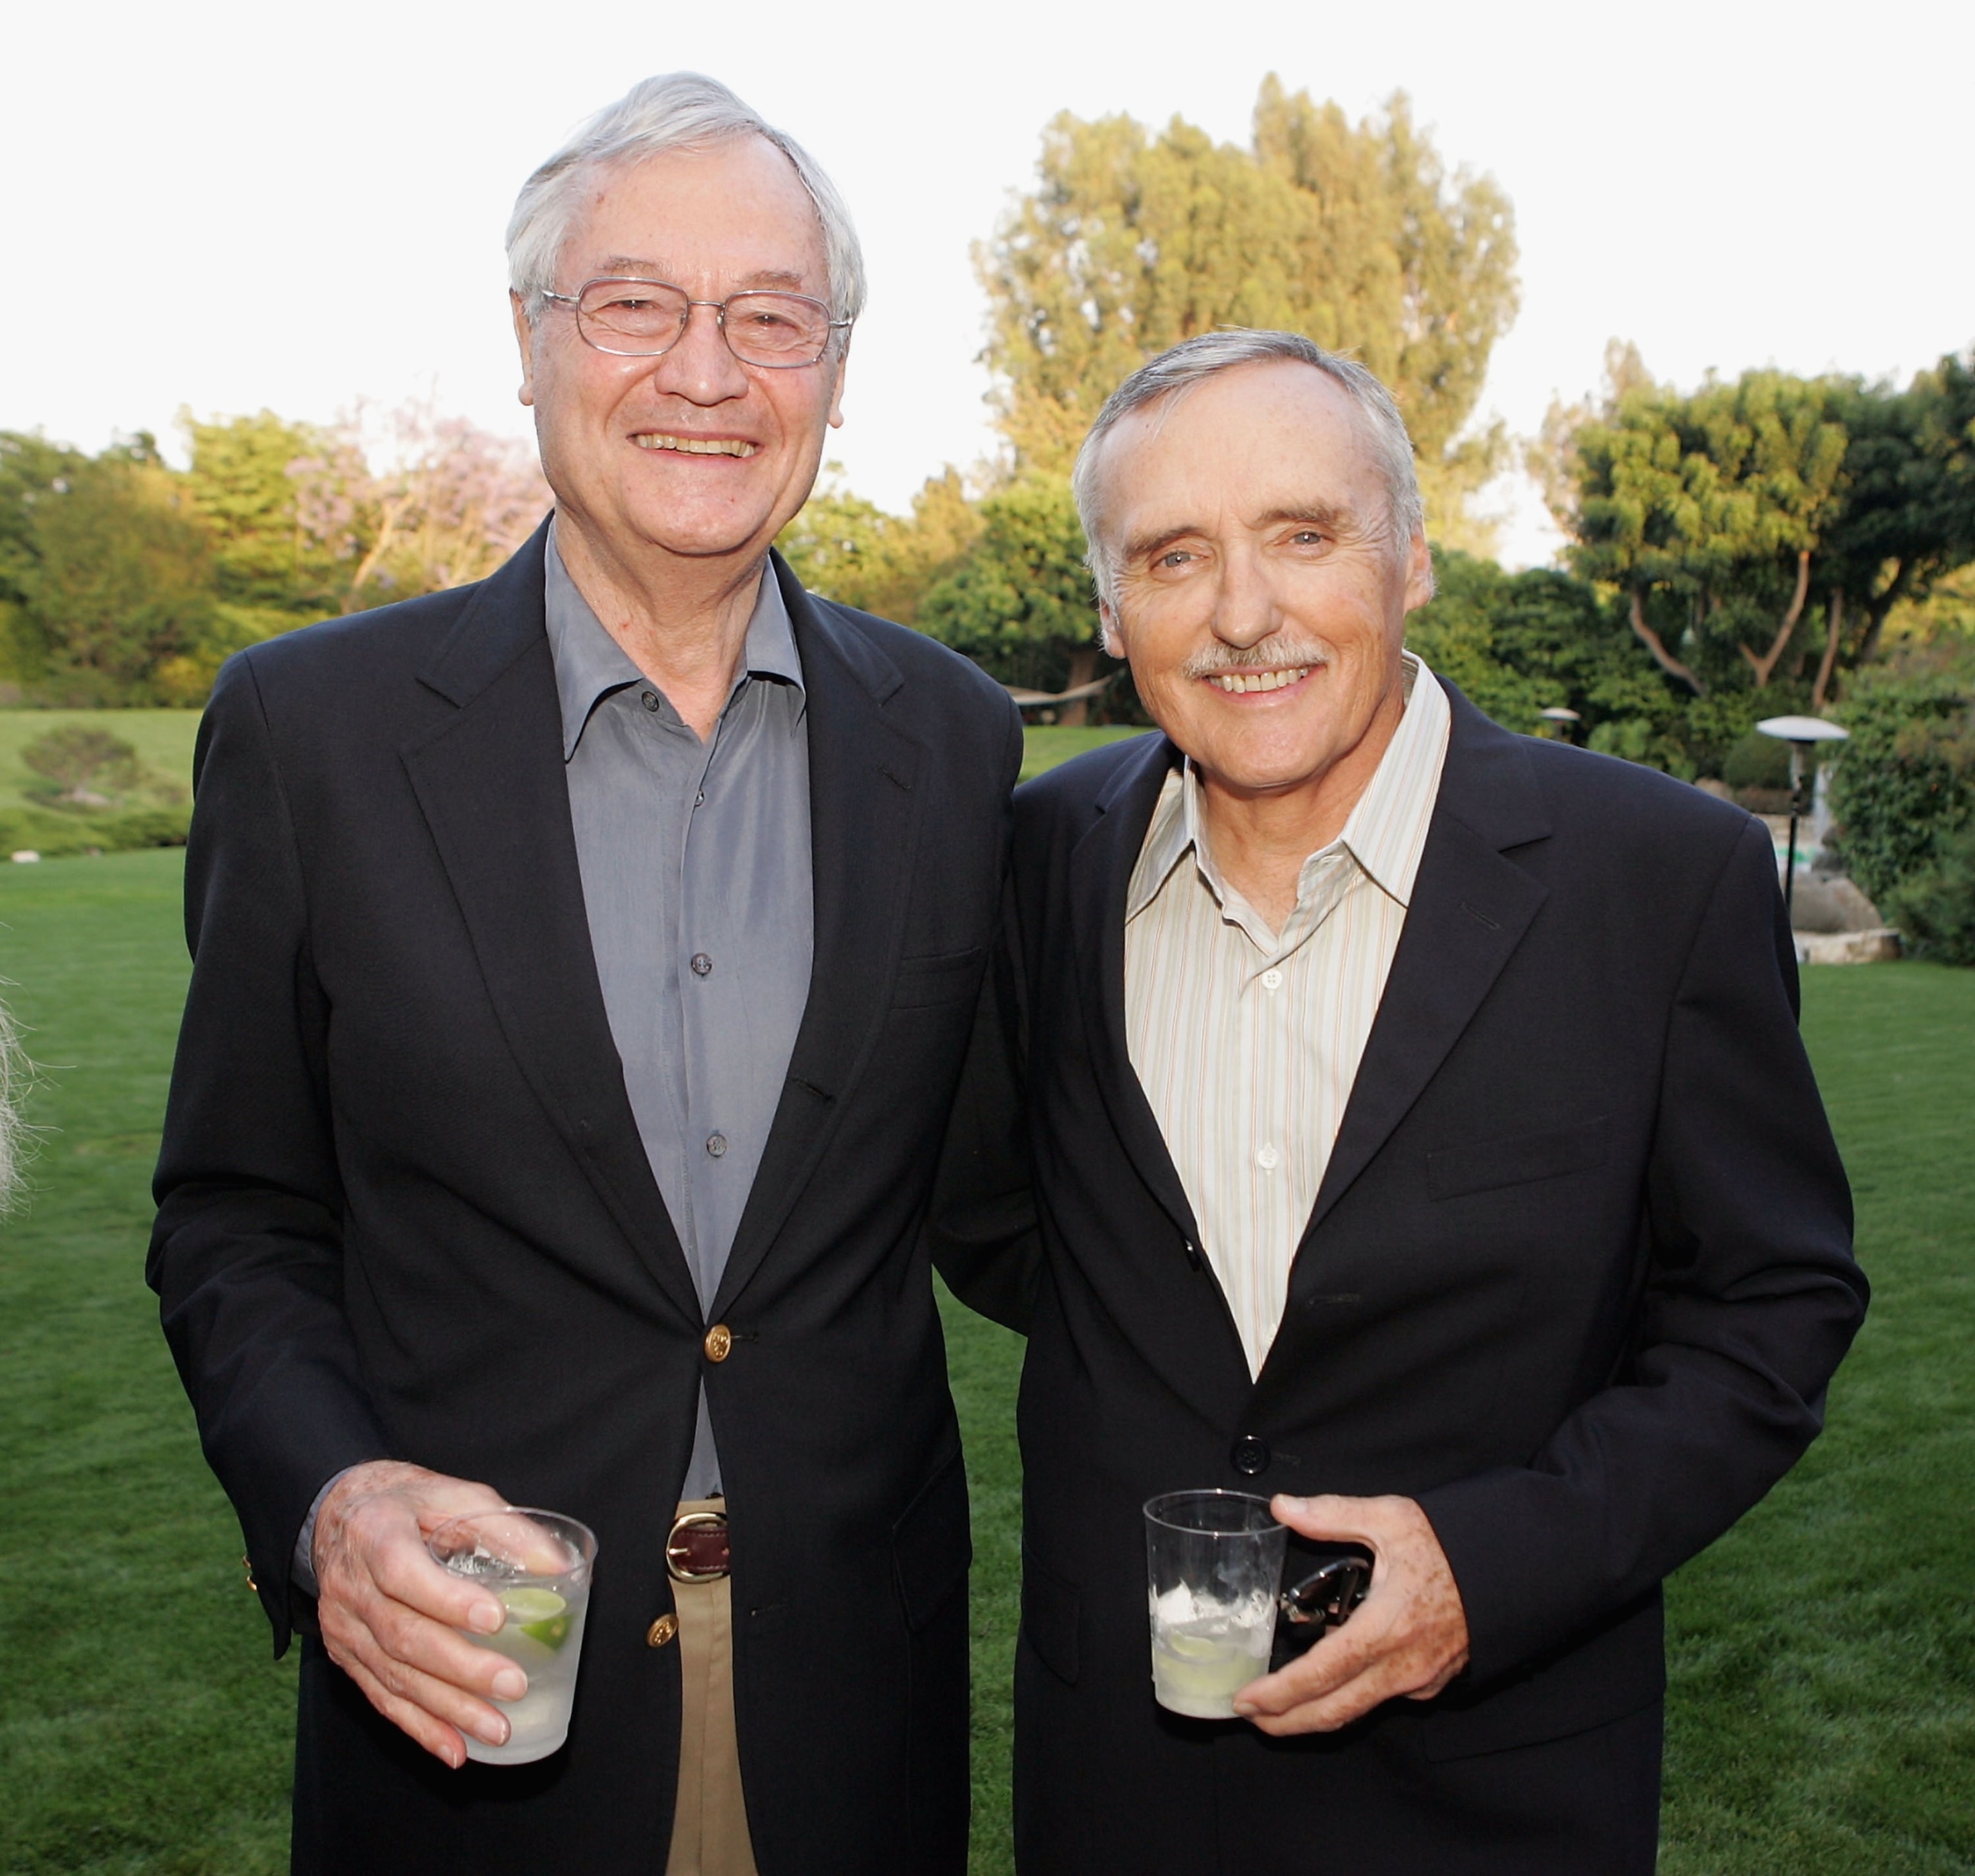 PHOTO: Director Roger Corman and actor Dennis Hopper pose at a special screening of Dennis Hopper's "The Last Movie", newly restored, at the Playboy Mansion on May 31, 2005, in Holmby Hills, California. 